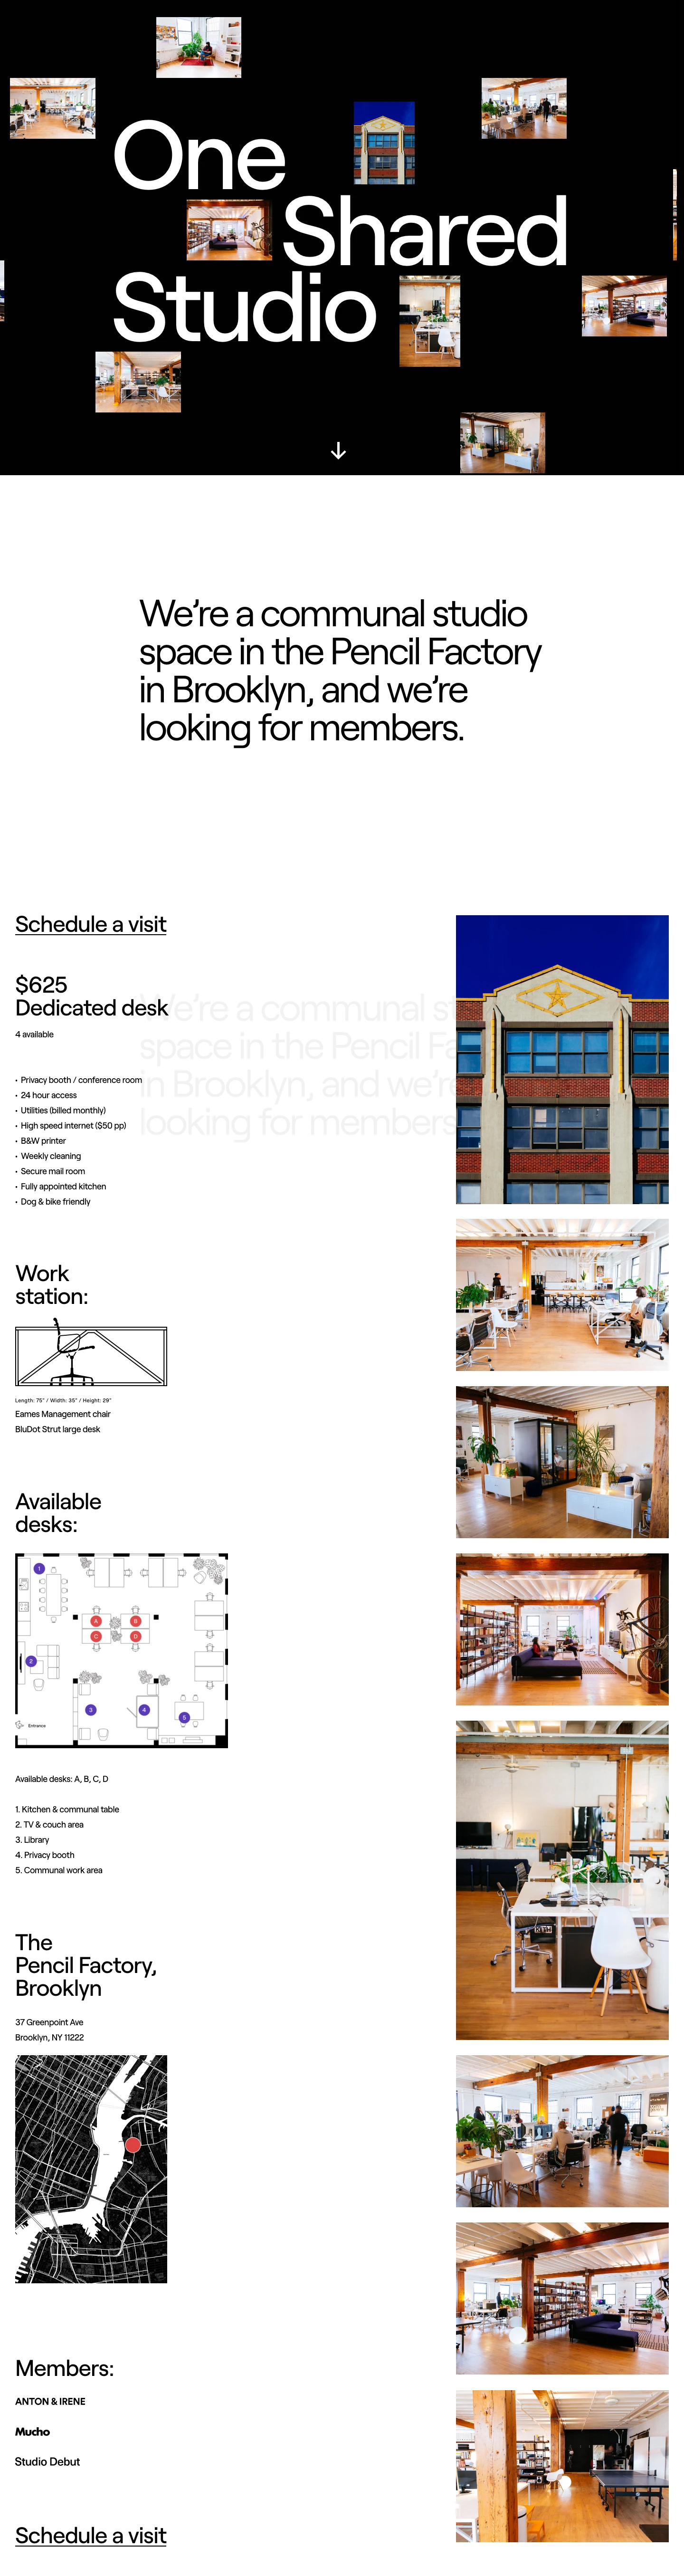 One Shared Studio Landing Page Example: We’re a communal studio space in the Pencil Factory in Brooklyn, and we’re looking for members.